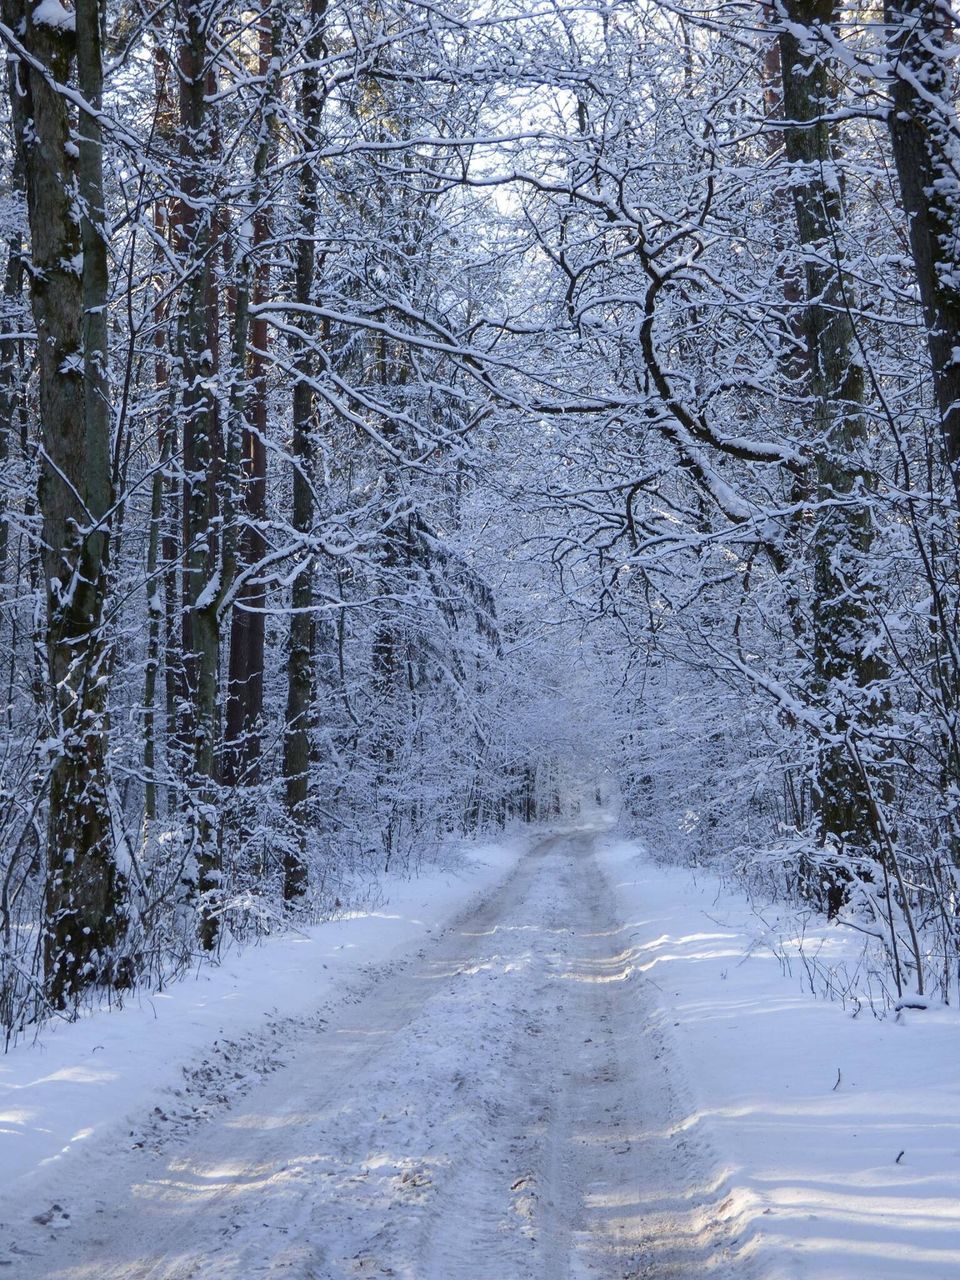 winter, cold temperature, snow, season, tree, weather, the way forward, nature, road, forest, water, tranquility, frozen, wet, beauty in nature, day, outdoors, no people, street, diminishing perspective